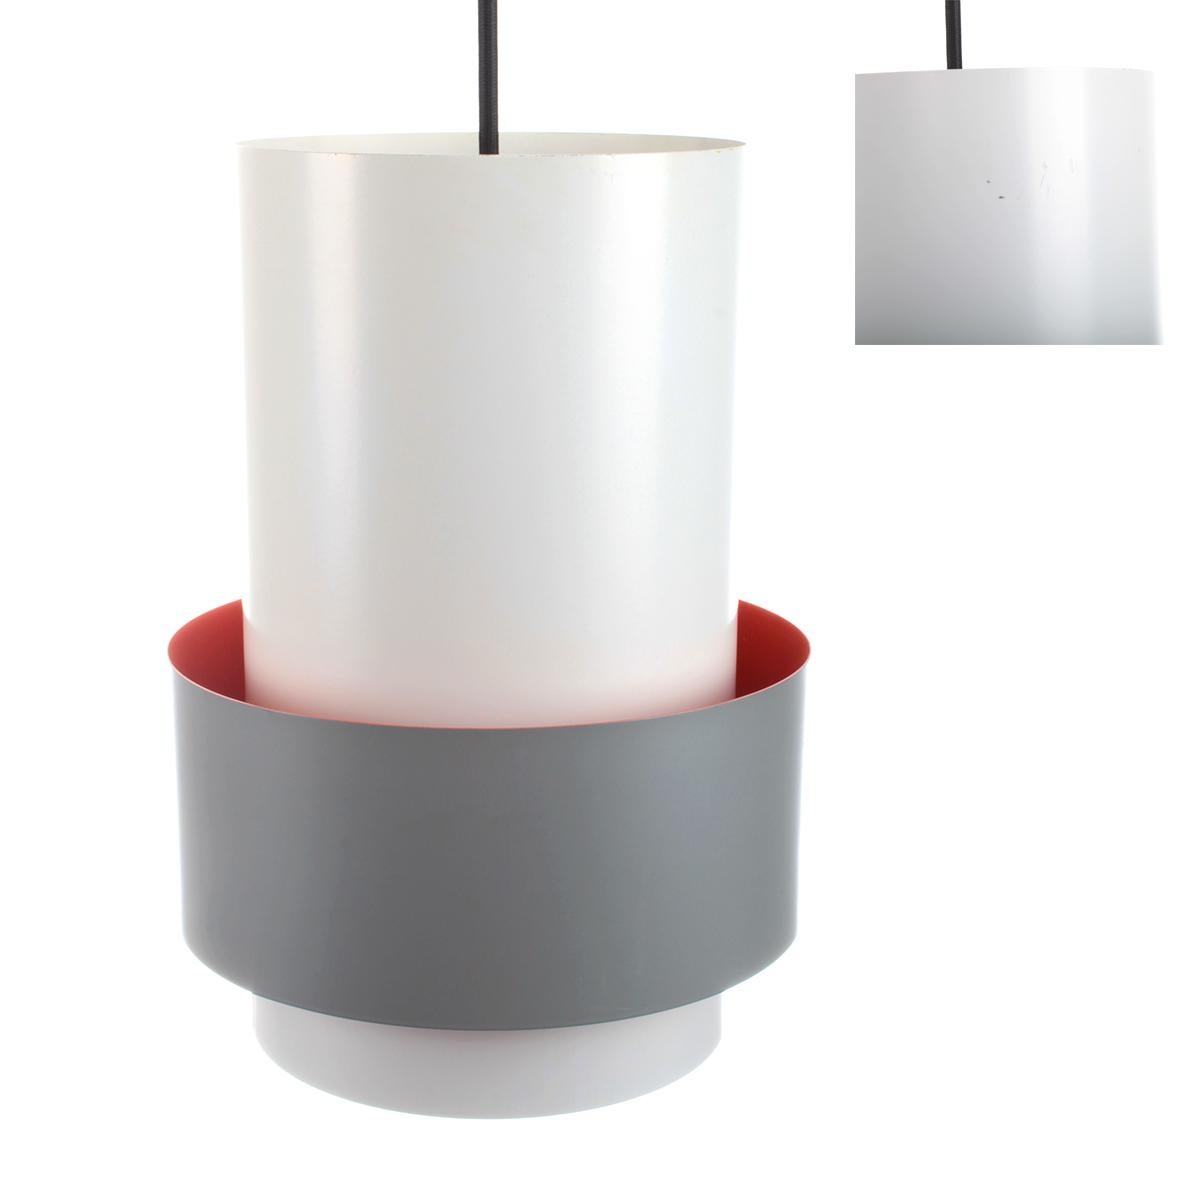 Lacquered Central Gray Minimalist Light by Jo Hammerborg for Fog & Mørup in 1967